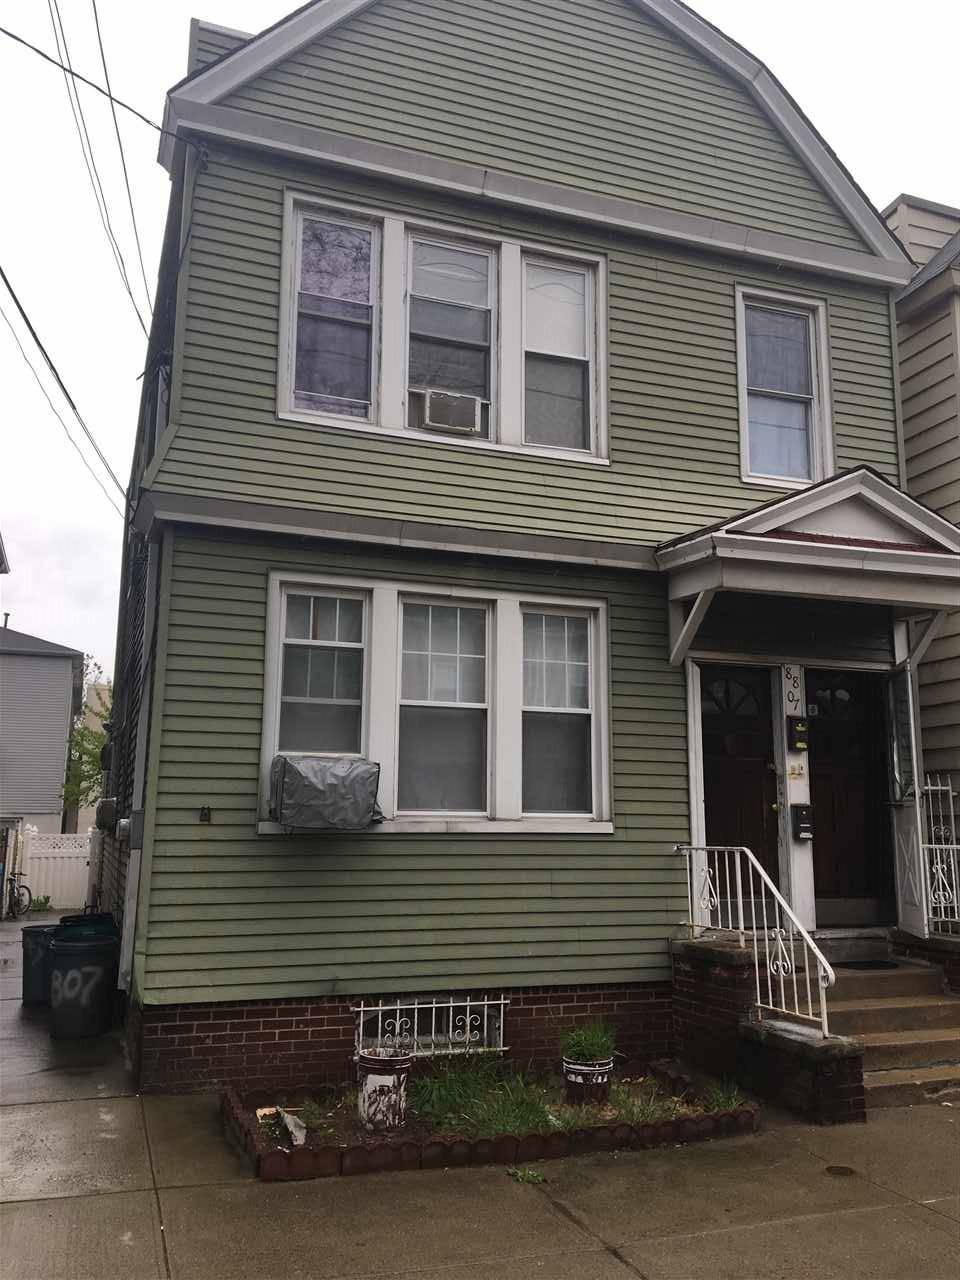 property to be renovated for July 15 - Multi-Family New Jersey